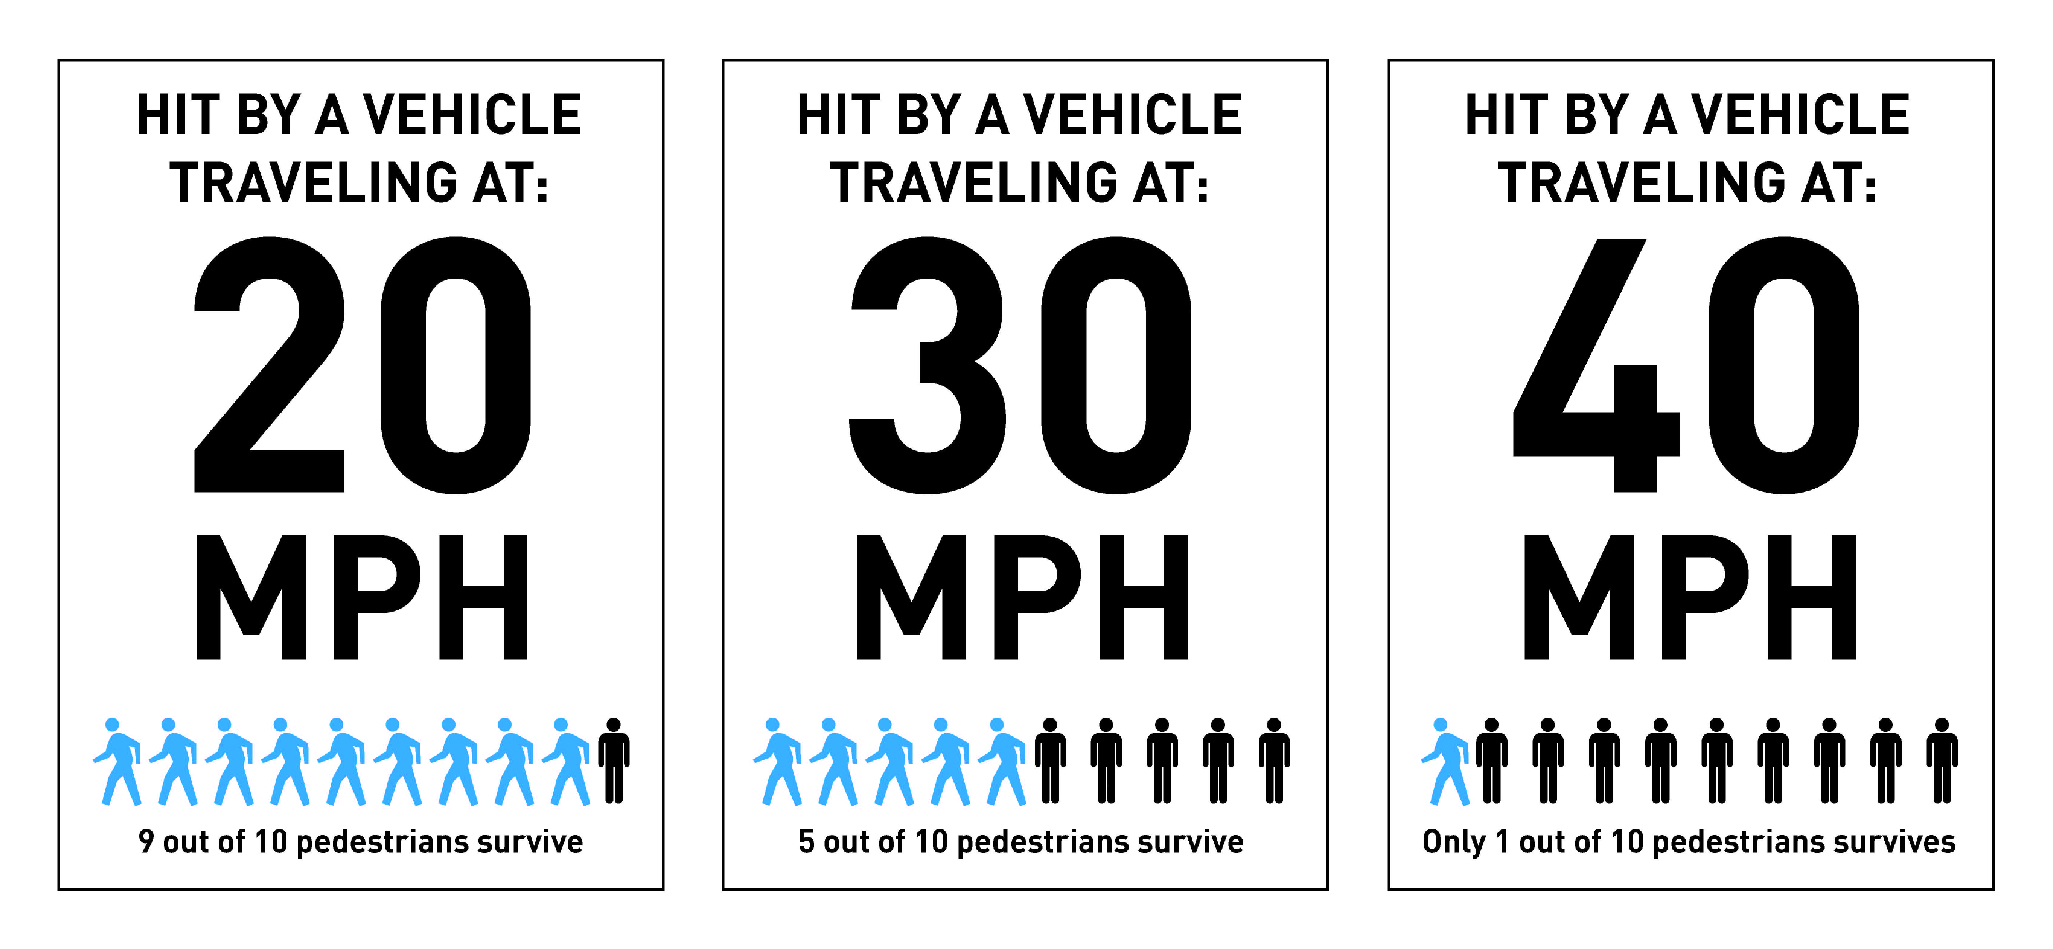 This image details survival rates of pedestrians if hit by vehicles traveling at different speeds. 9 out of 10 pedestrians survive if hit by a vehicle traveling at 20 miles per hour. 5 out of 10 pedestrians survive if hit by a vehicle traveling at 30 miles per hour. Only 1 out of 10 pedestrians survive if hit by a vehicle traveling at 40 miles per hour. 